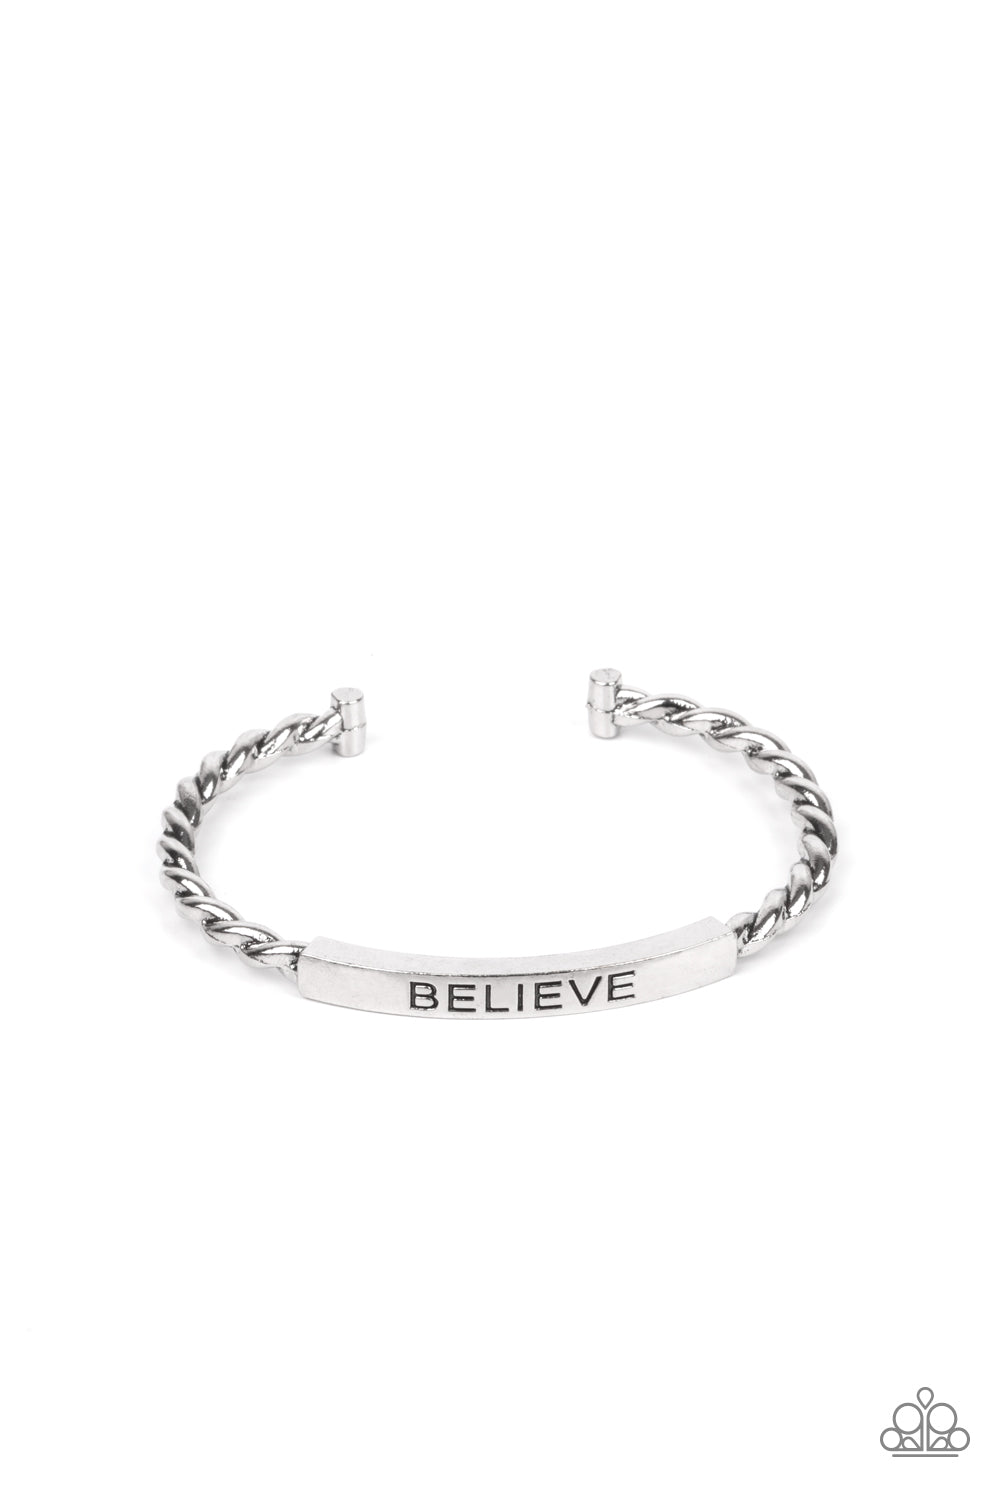 Paparazzi Accessories - Silver bracelet - twisted silver bars attach to a shiny silver plate stamped in the word, "BELIEVE," creating an inspiring cuff around the wrist.